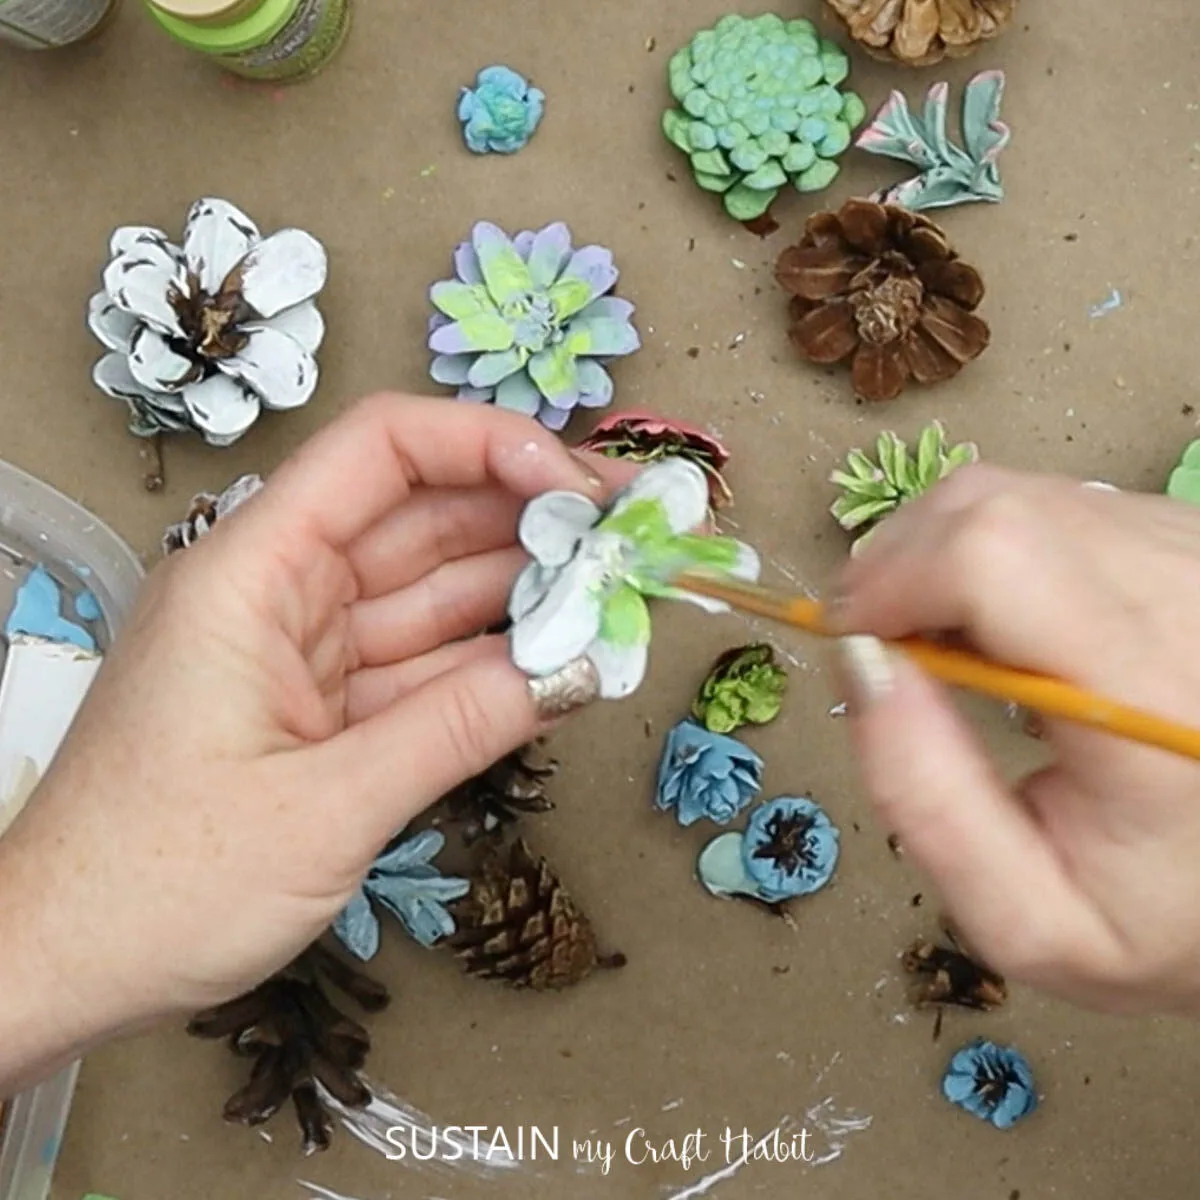 Painting a cut pine cone with green paint.